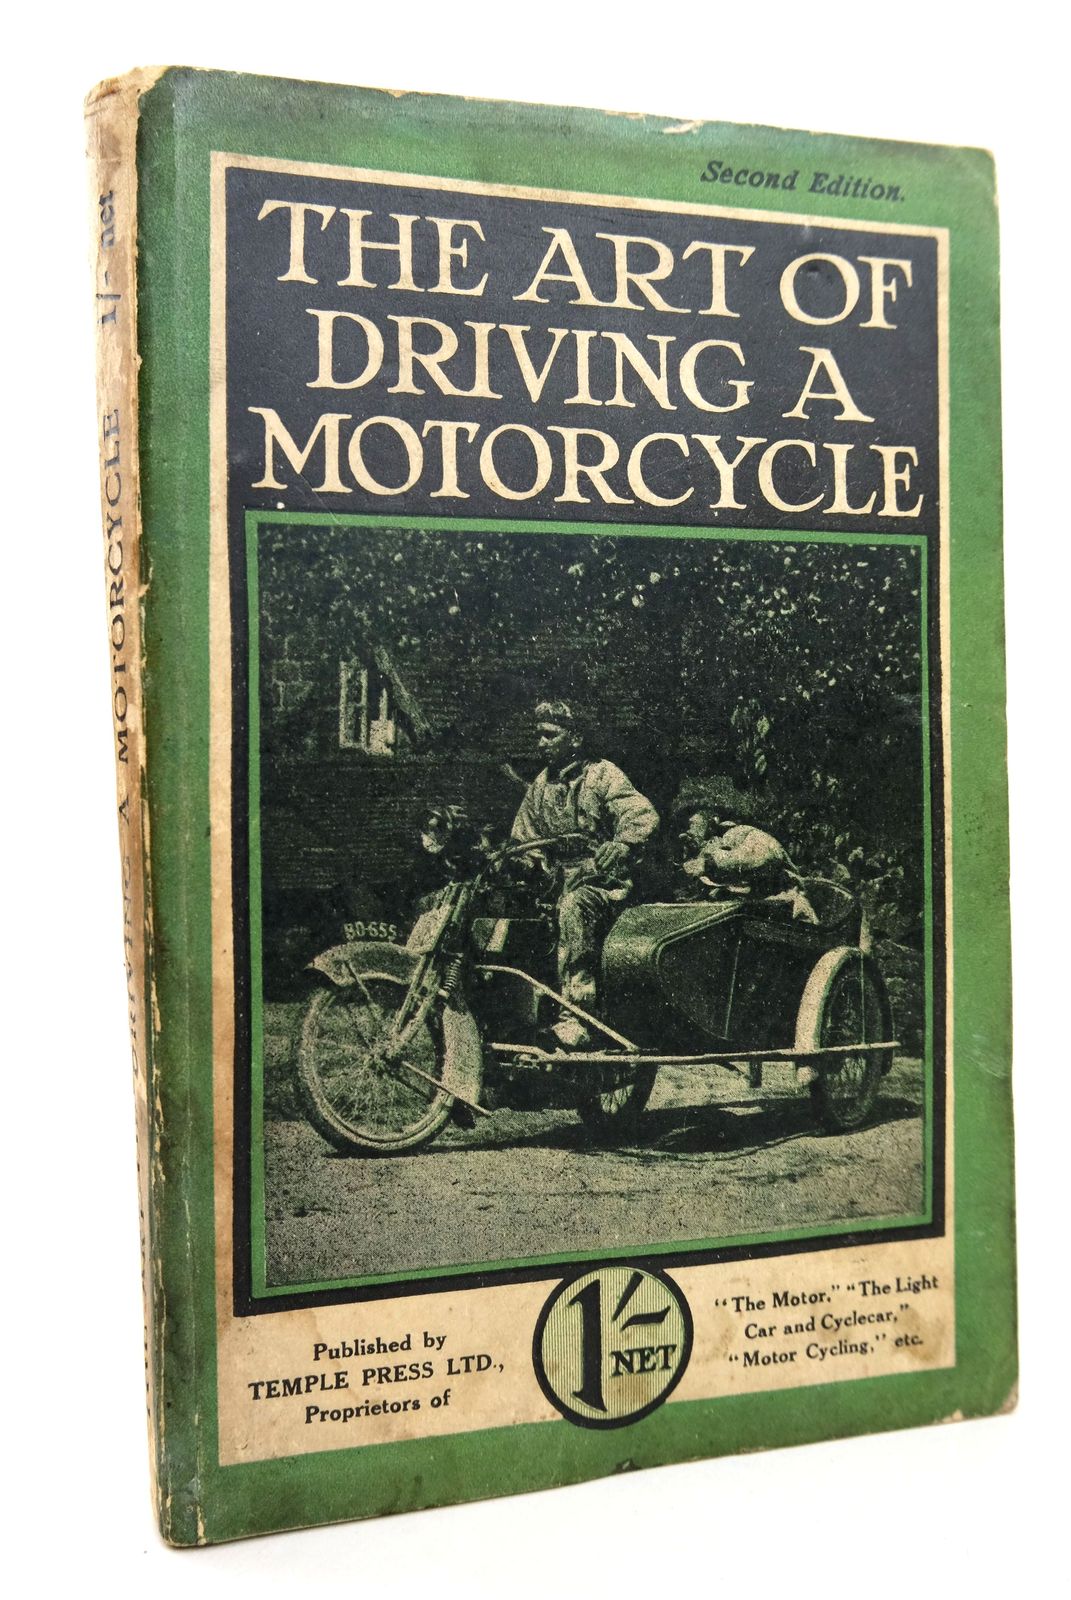 Photo of THE ART OF DRIVING A MOTORCYCLE published by Temple Press Limited (STOCK CODE: 1818717)  for sale by Stella & Rose's Books